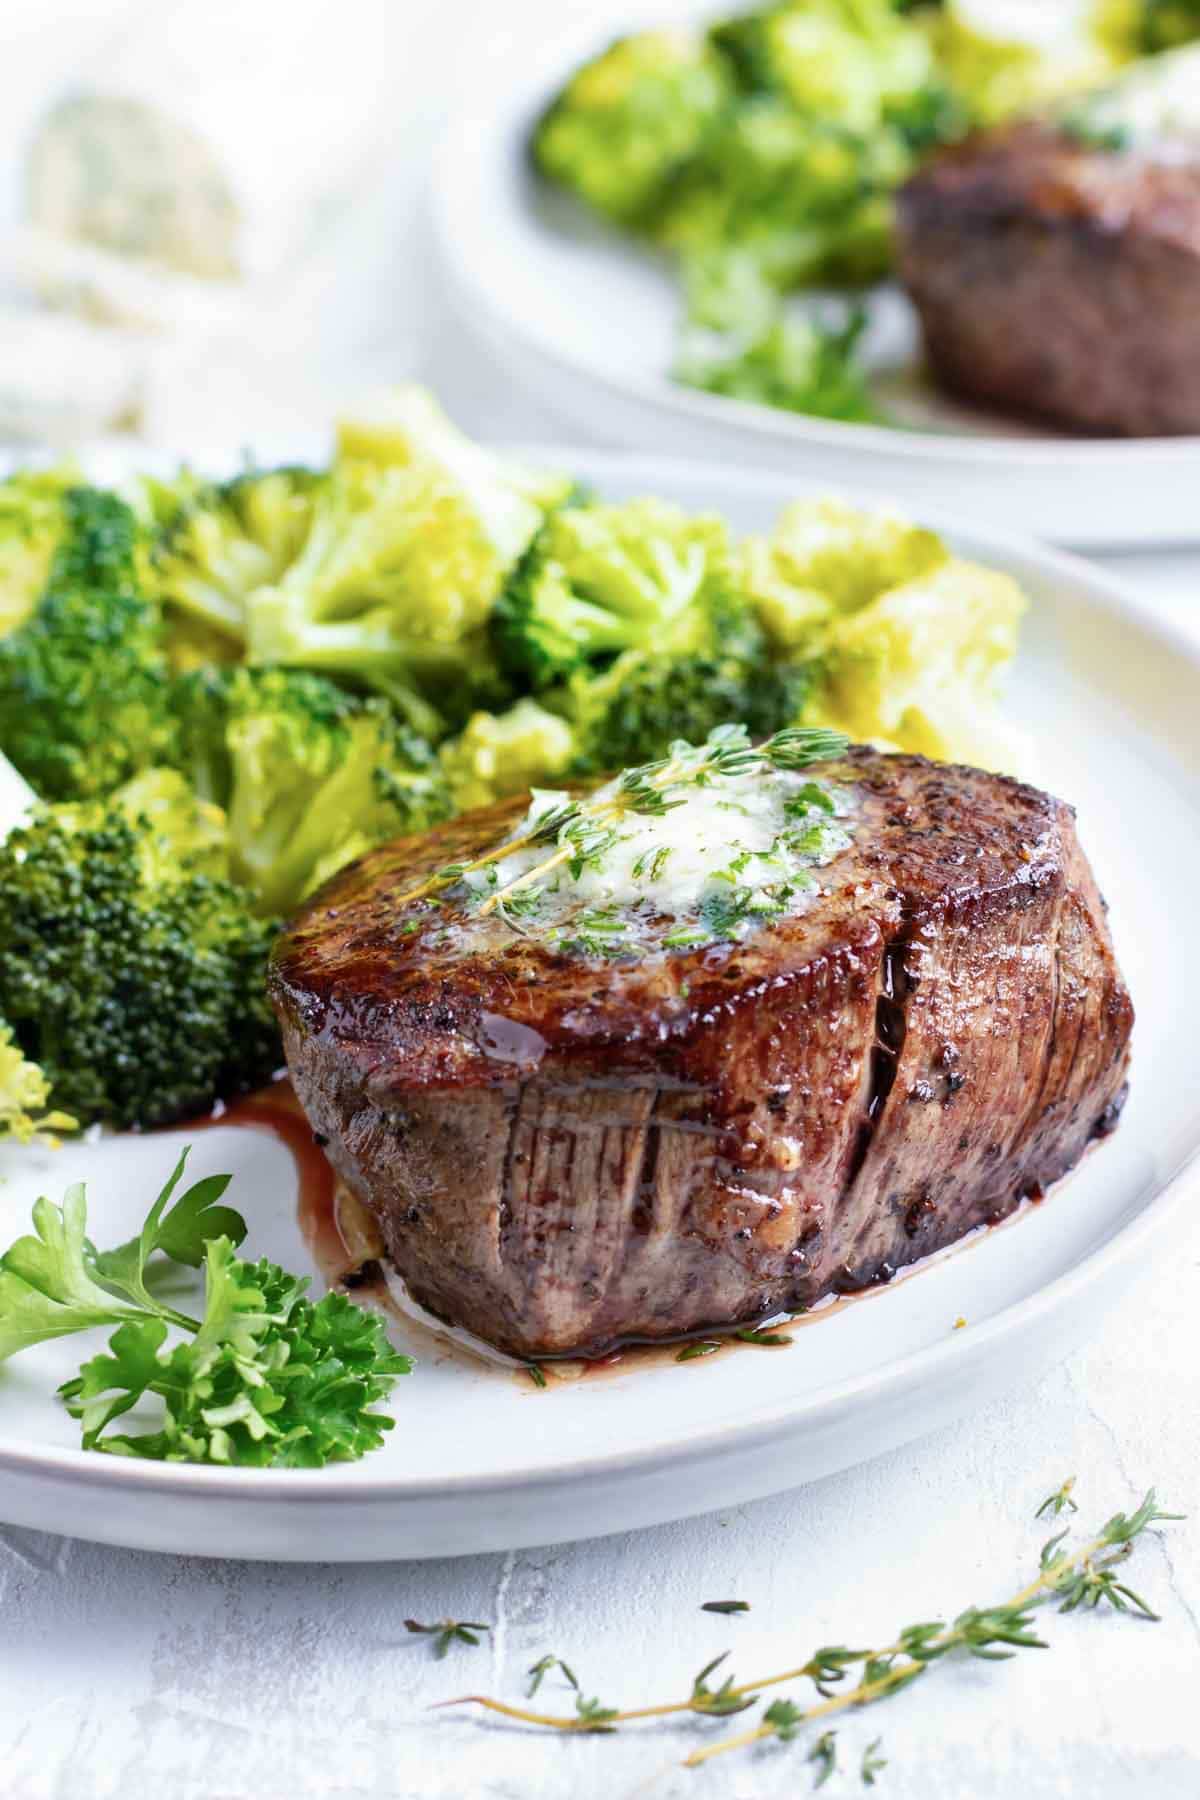 The best filet mignon recipe on a white plate with broccoli.